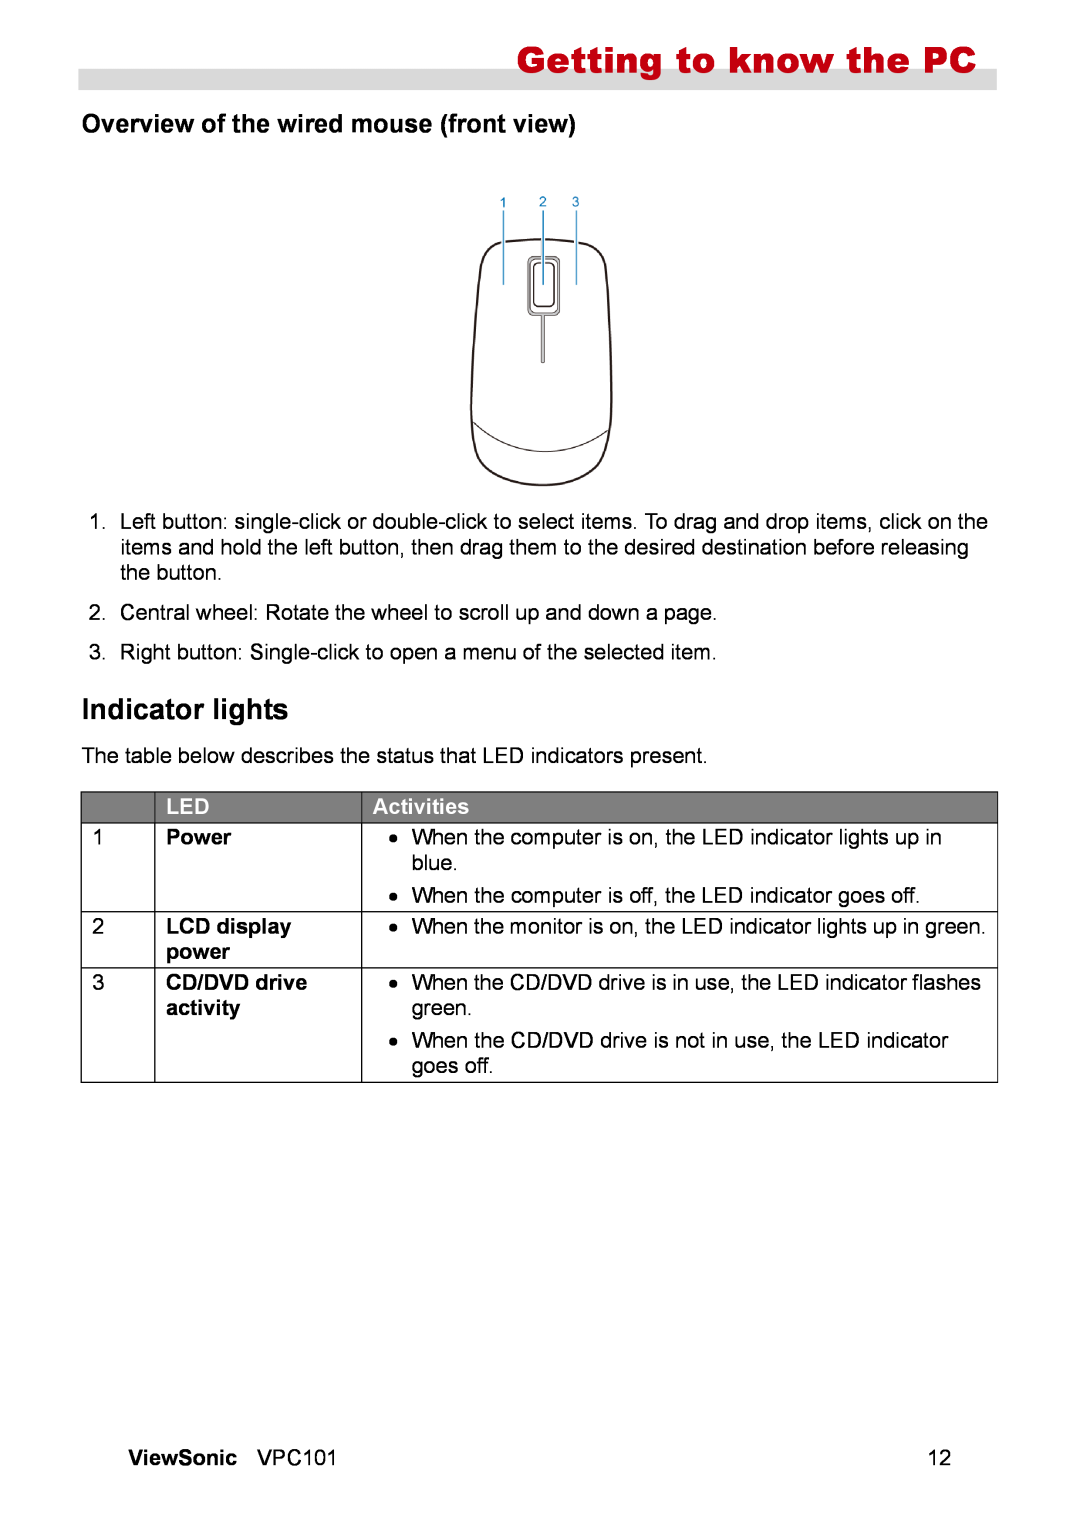 ViewSonic VPC101 manual Indicator lights, Overview of the wired mouse front view, Activities, Getting to know the PC 